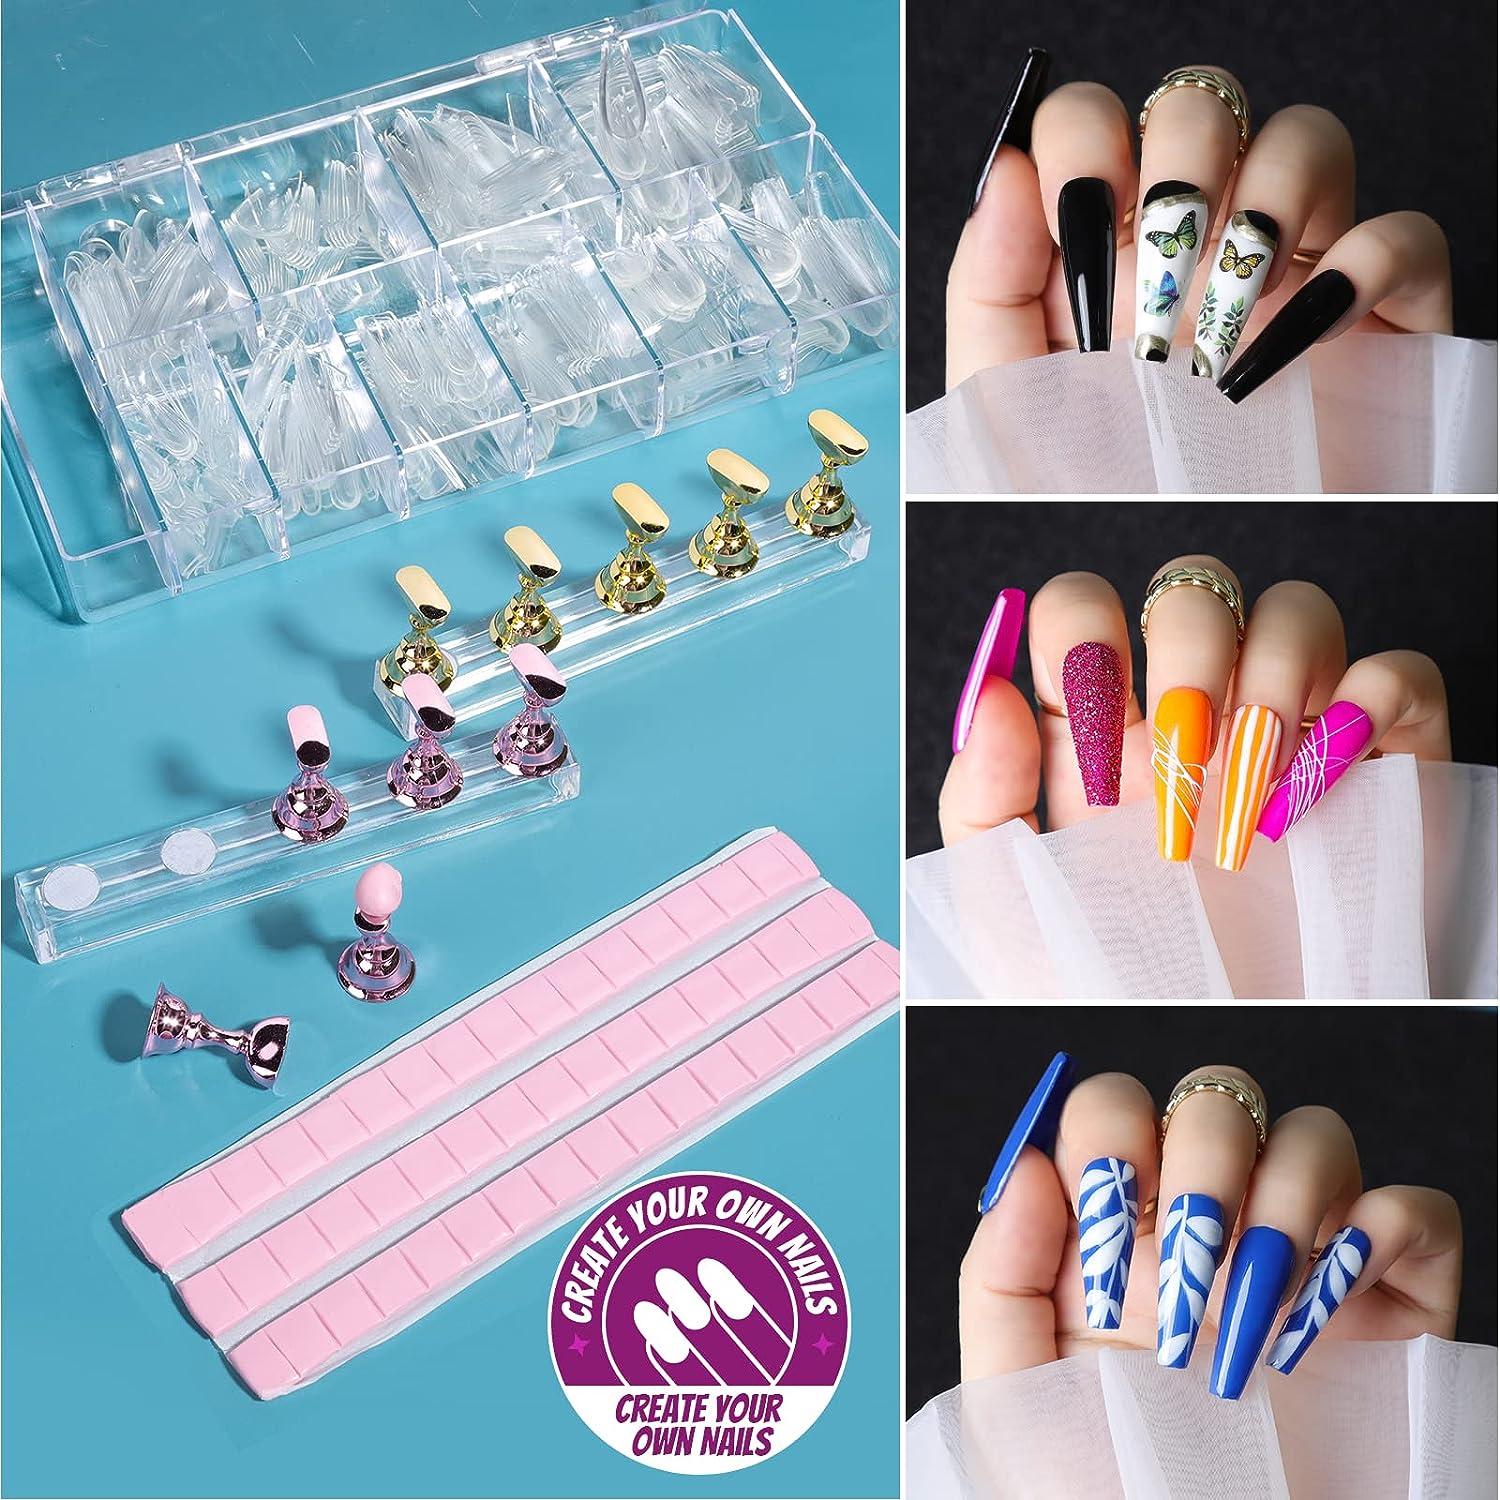 acrylic nail supplies, acrylic nail supplies Suppliers and Manufacturers at